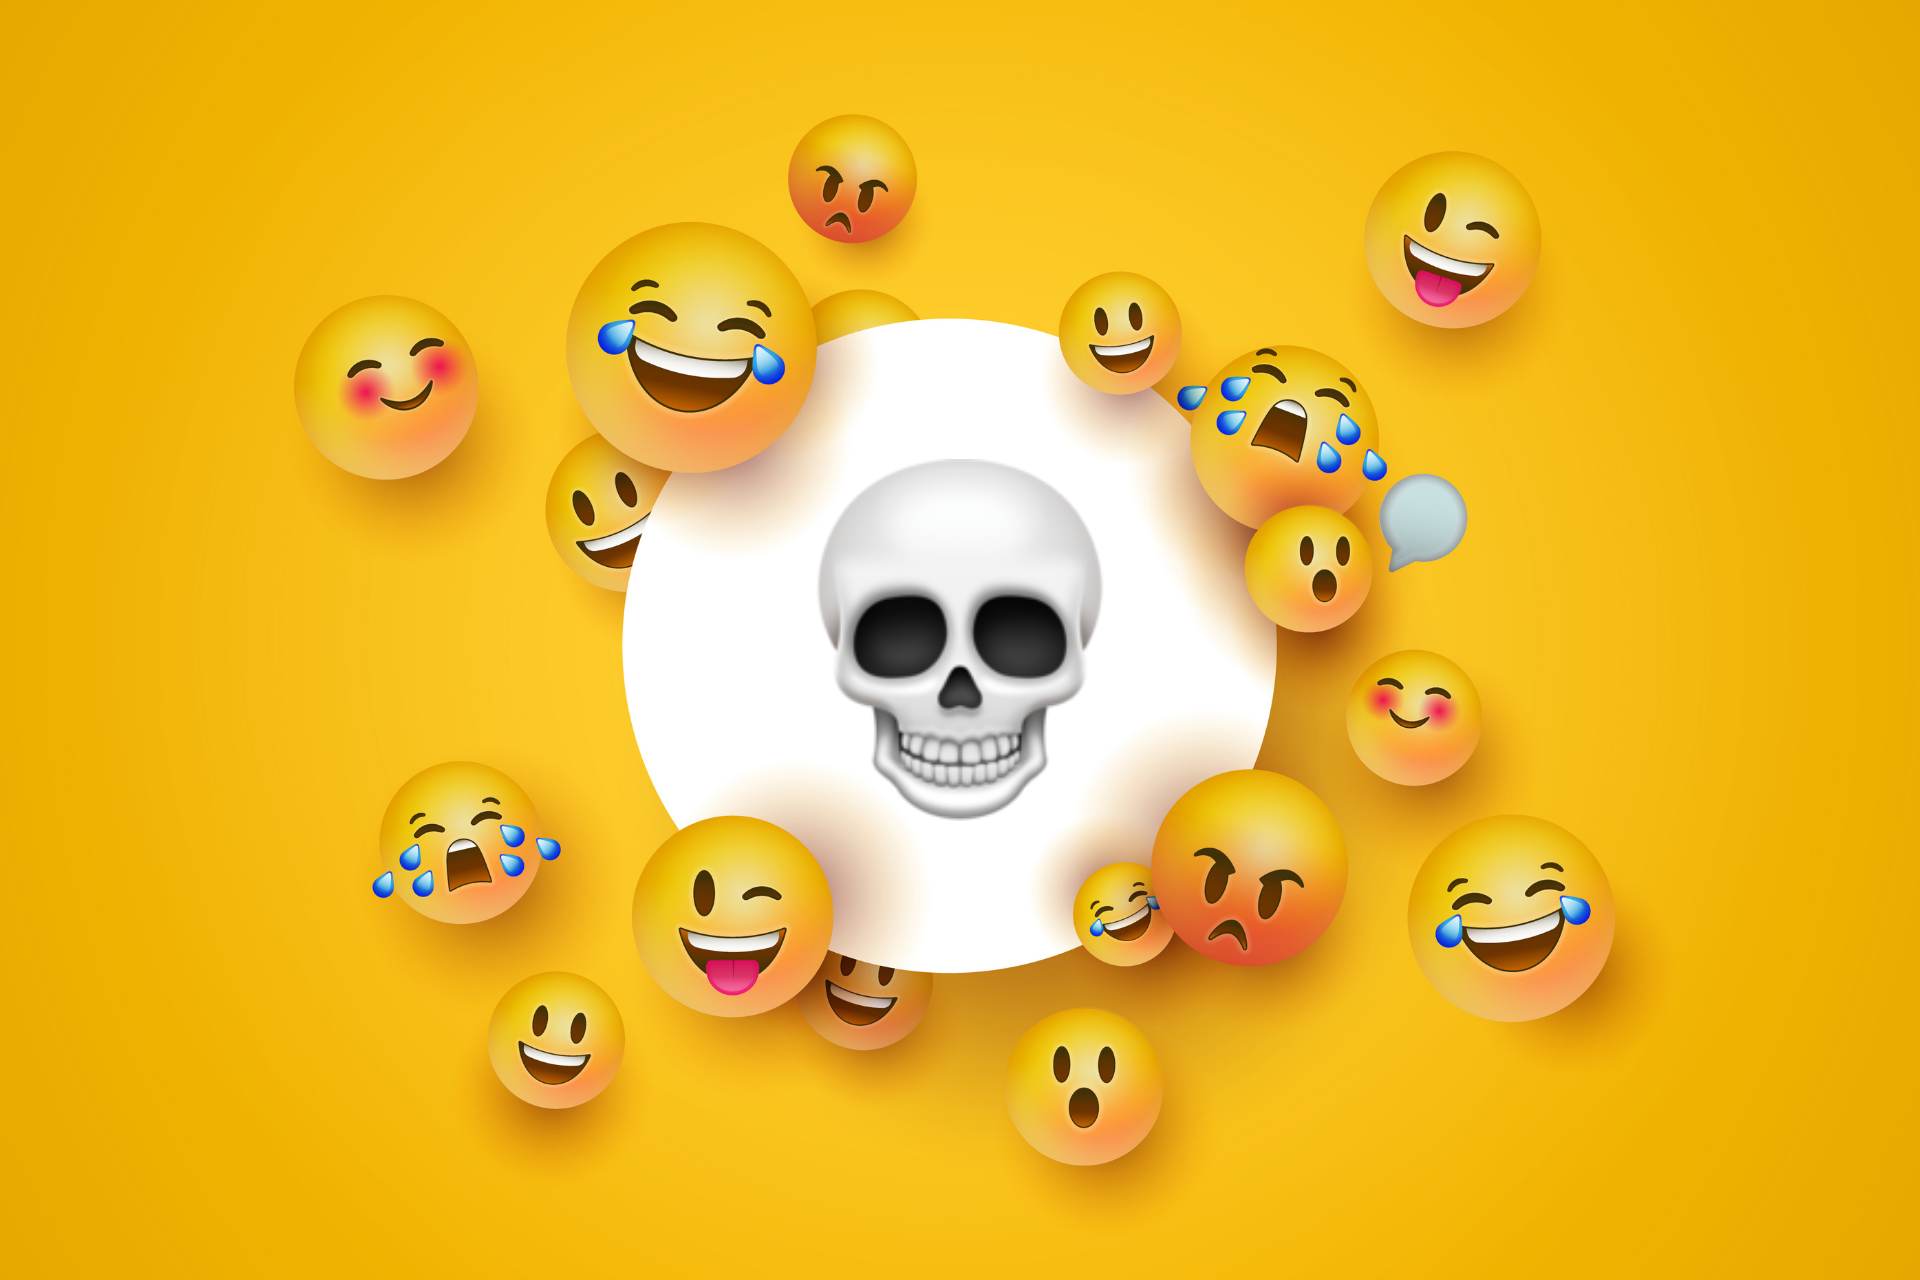 The laugh-cry emoji is dead. Here's why that bothers us so much